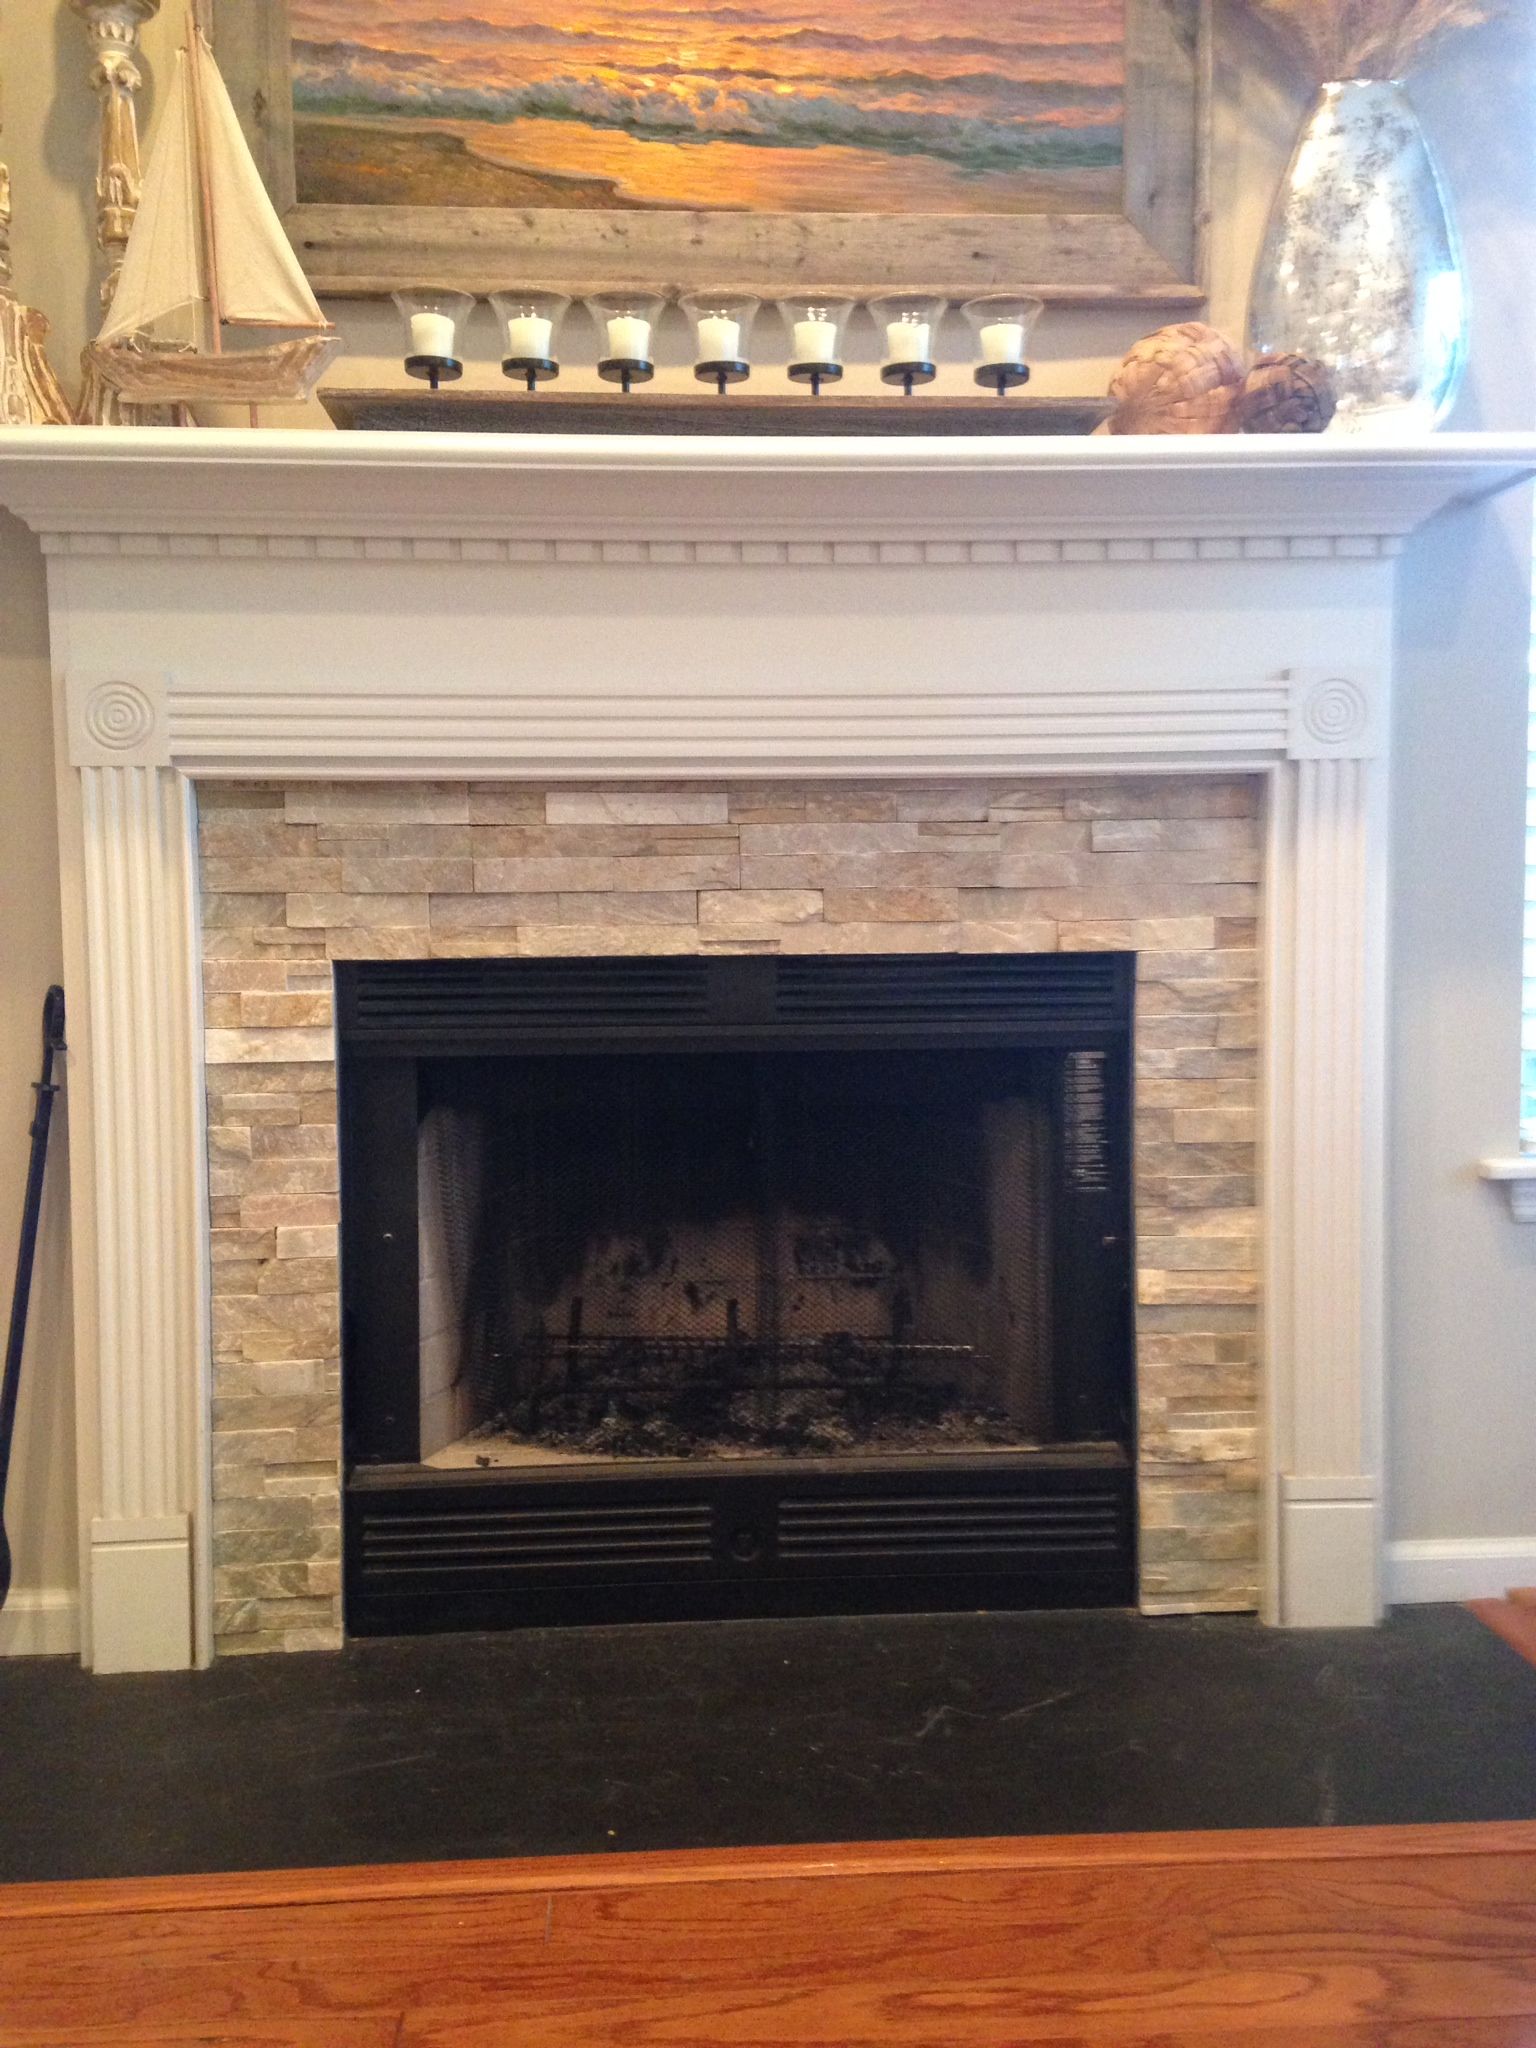 Fireplace Hearth Stone Lovely Fireplace Idea Mantel Wainscoting Design Craftsman